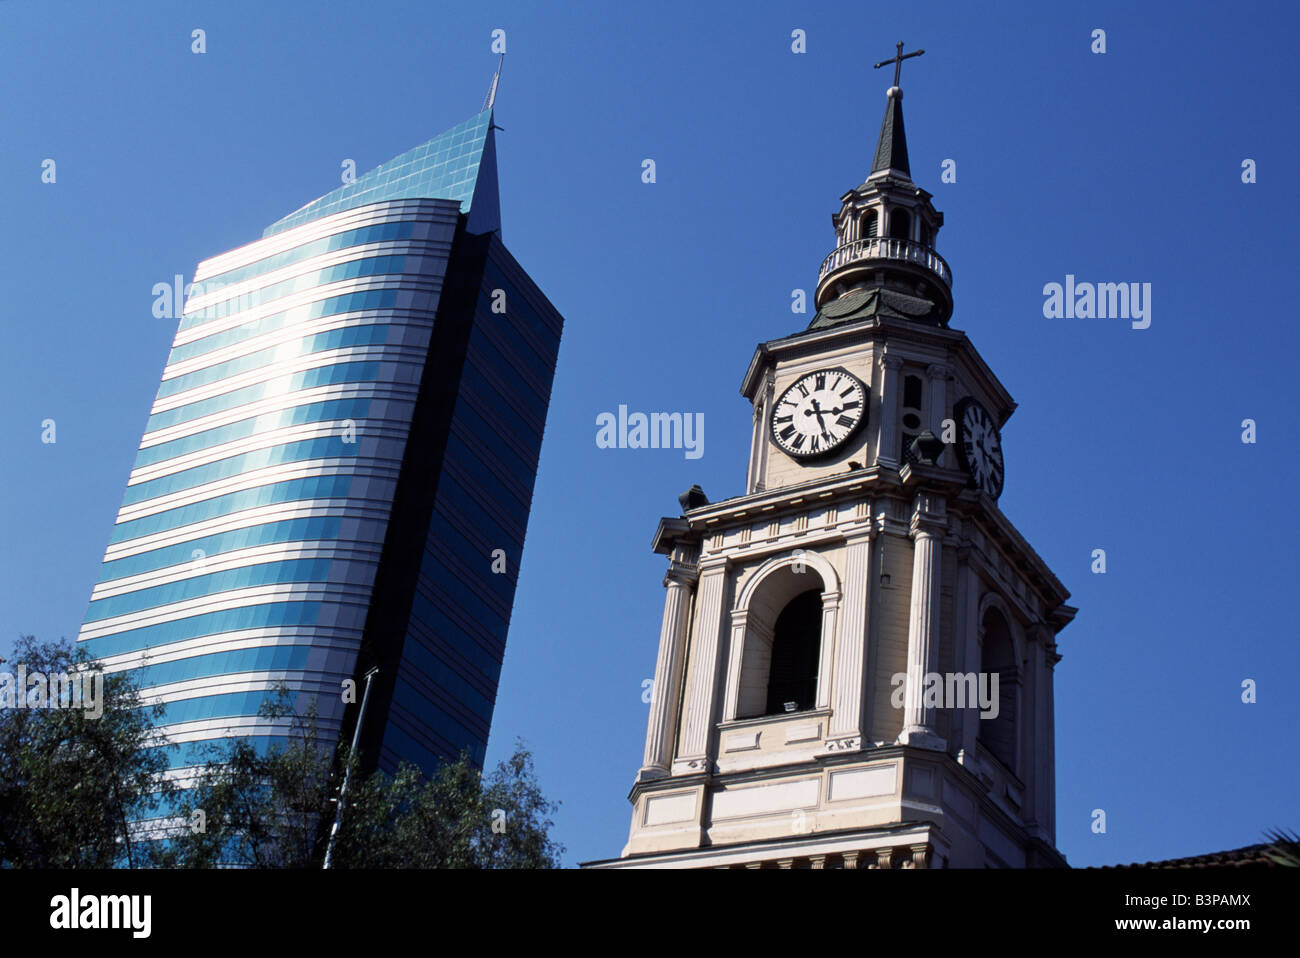 Chile, Santiago. Rising either side of Avenida del Libertador Bernardo O'Higgins, Santiago's main east-west throughfare, colloquially known as La Alameda, are the two faces of Santiago. On the left a modern high-rise office building and on the right the tower of Iglesia San Francisco, Santiago's oldest building (built in 1586-1628AD) Stock Photo